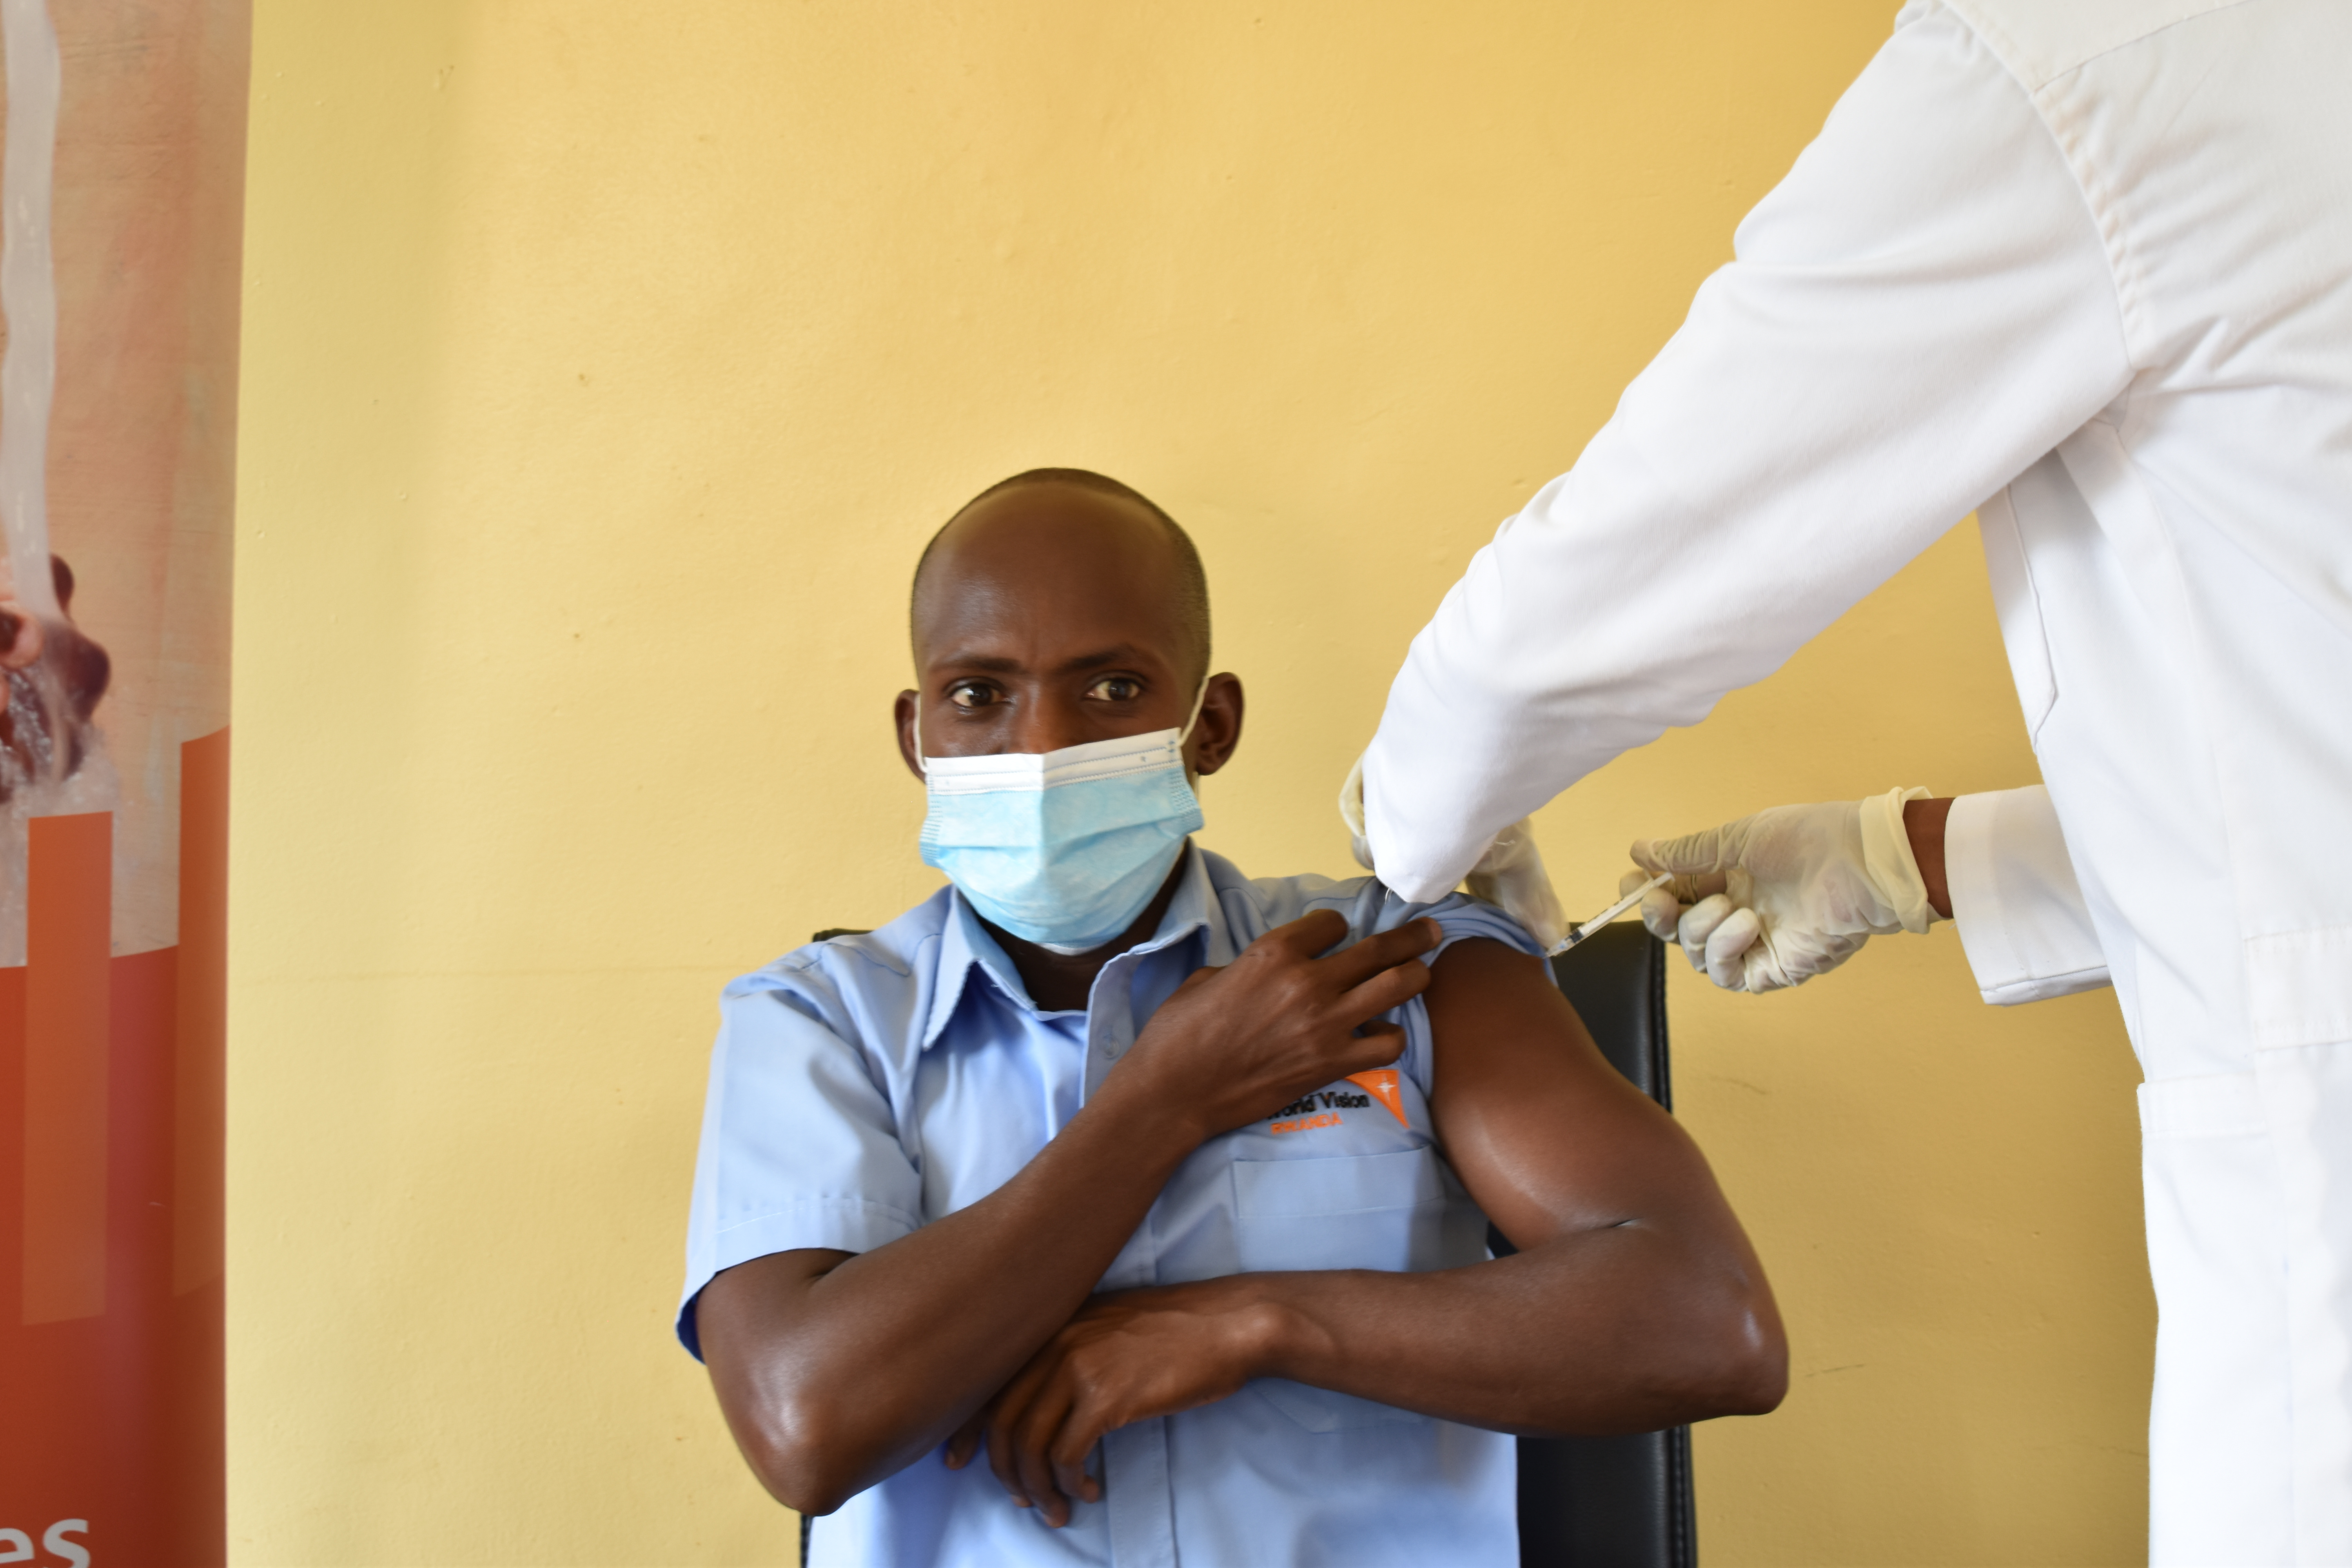 One of the frontline staff who received the vaccine